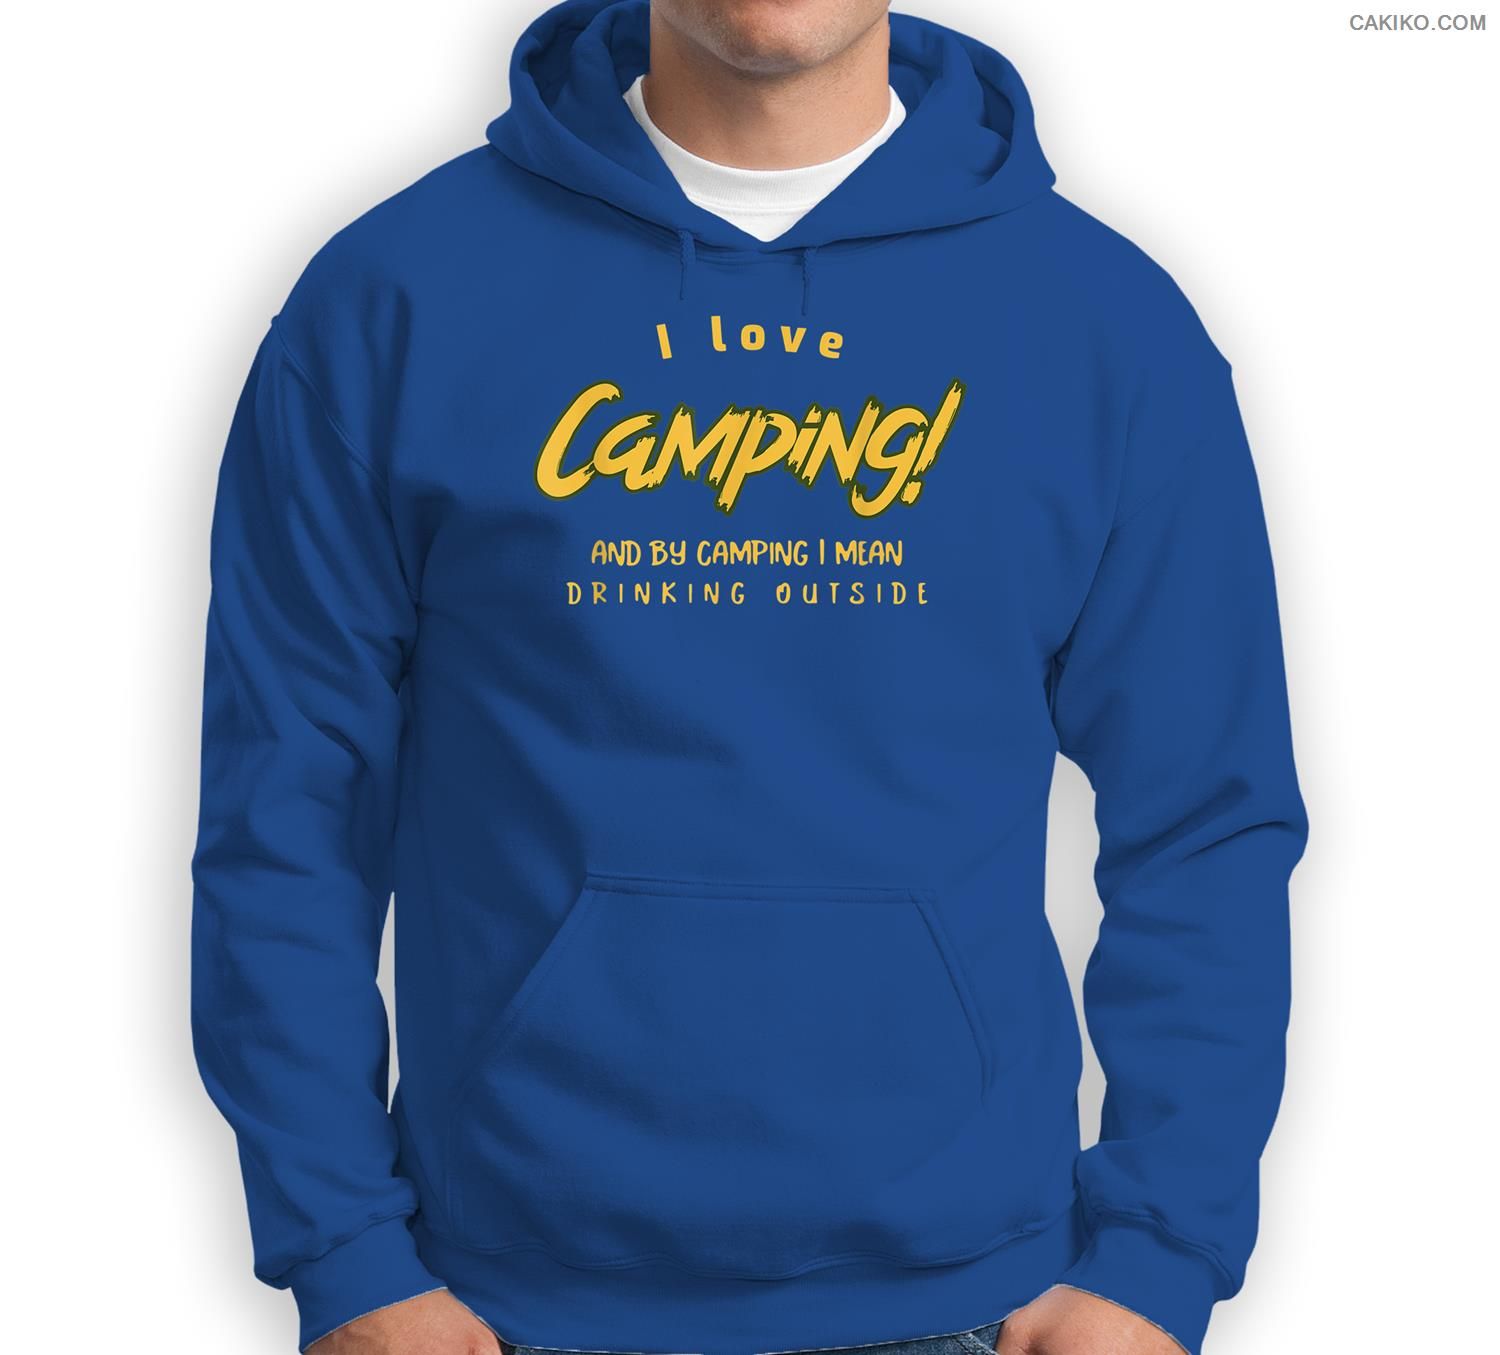 I Love Camping And Drinking Beer With Friends Outside Sweatshirt & Hoodie